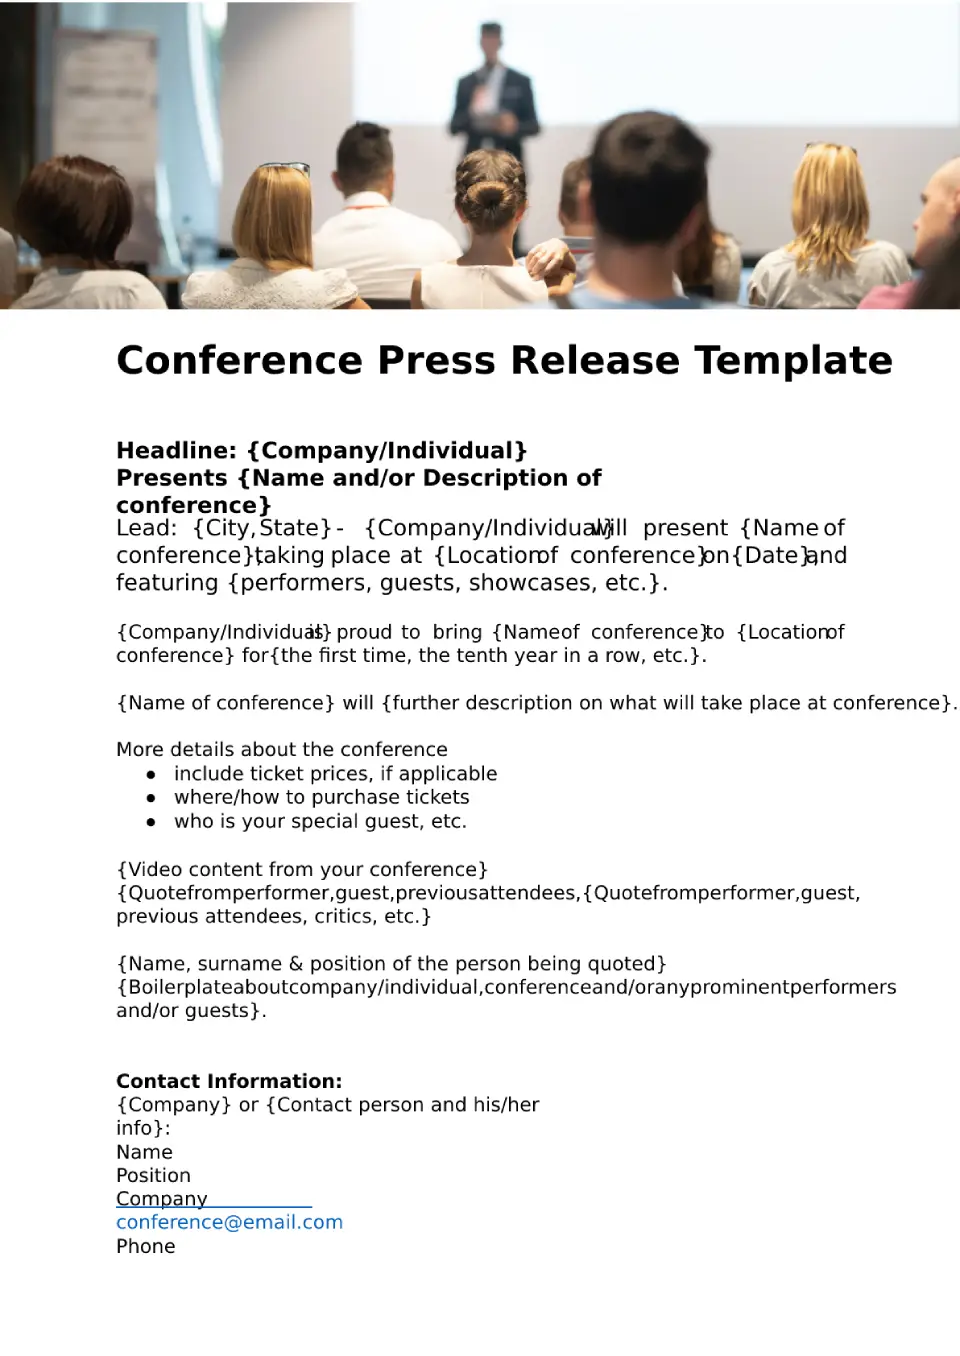 Conference Press Release for Google Docs